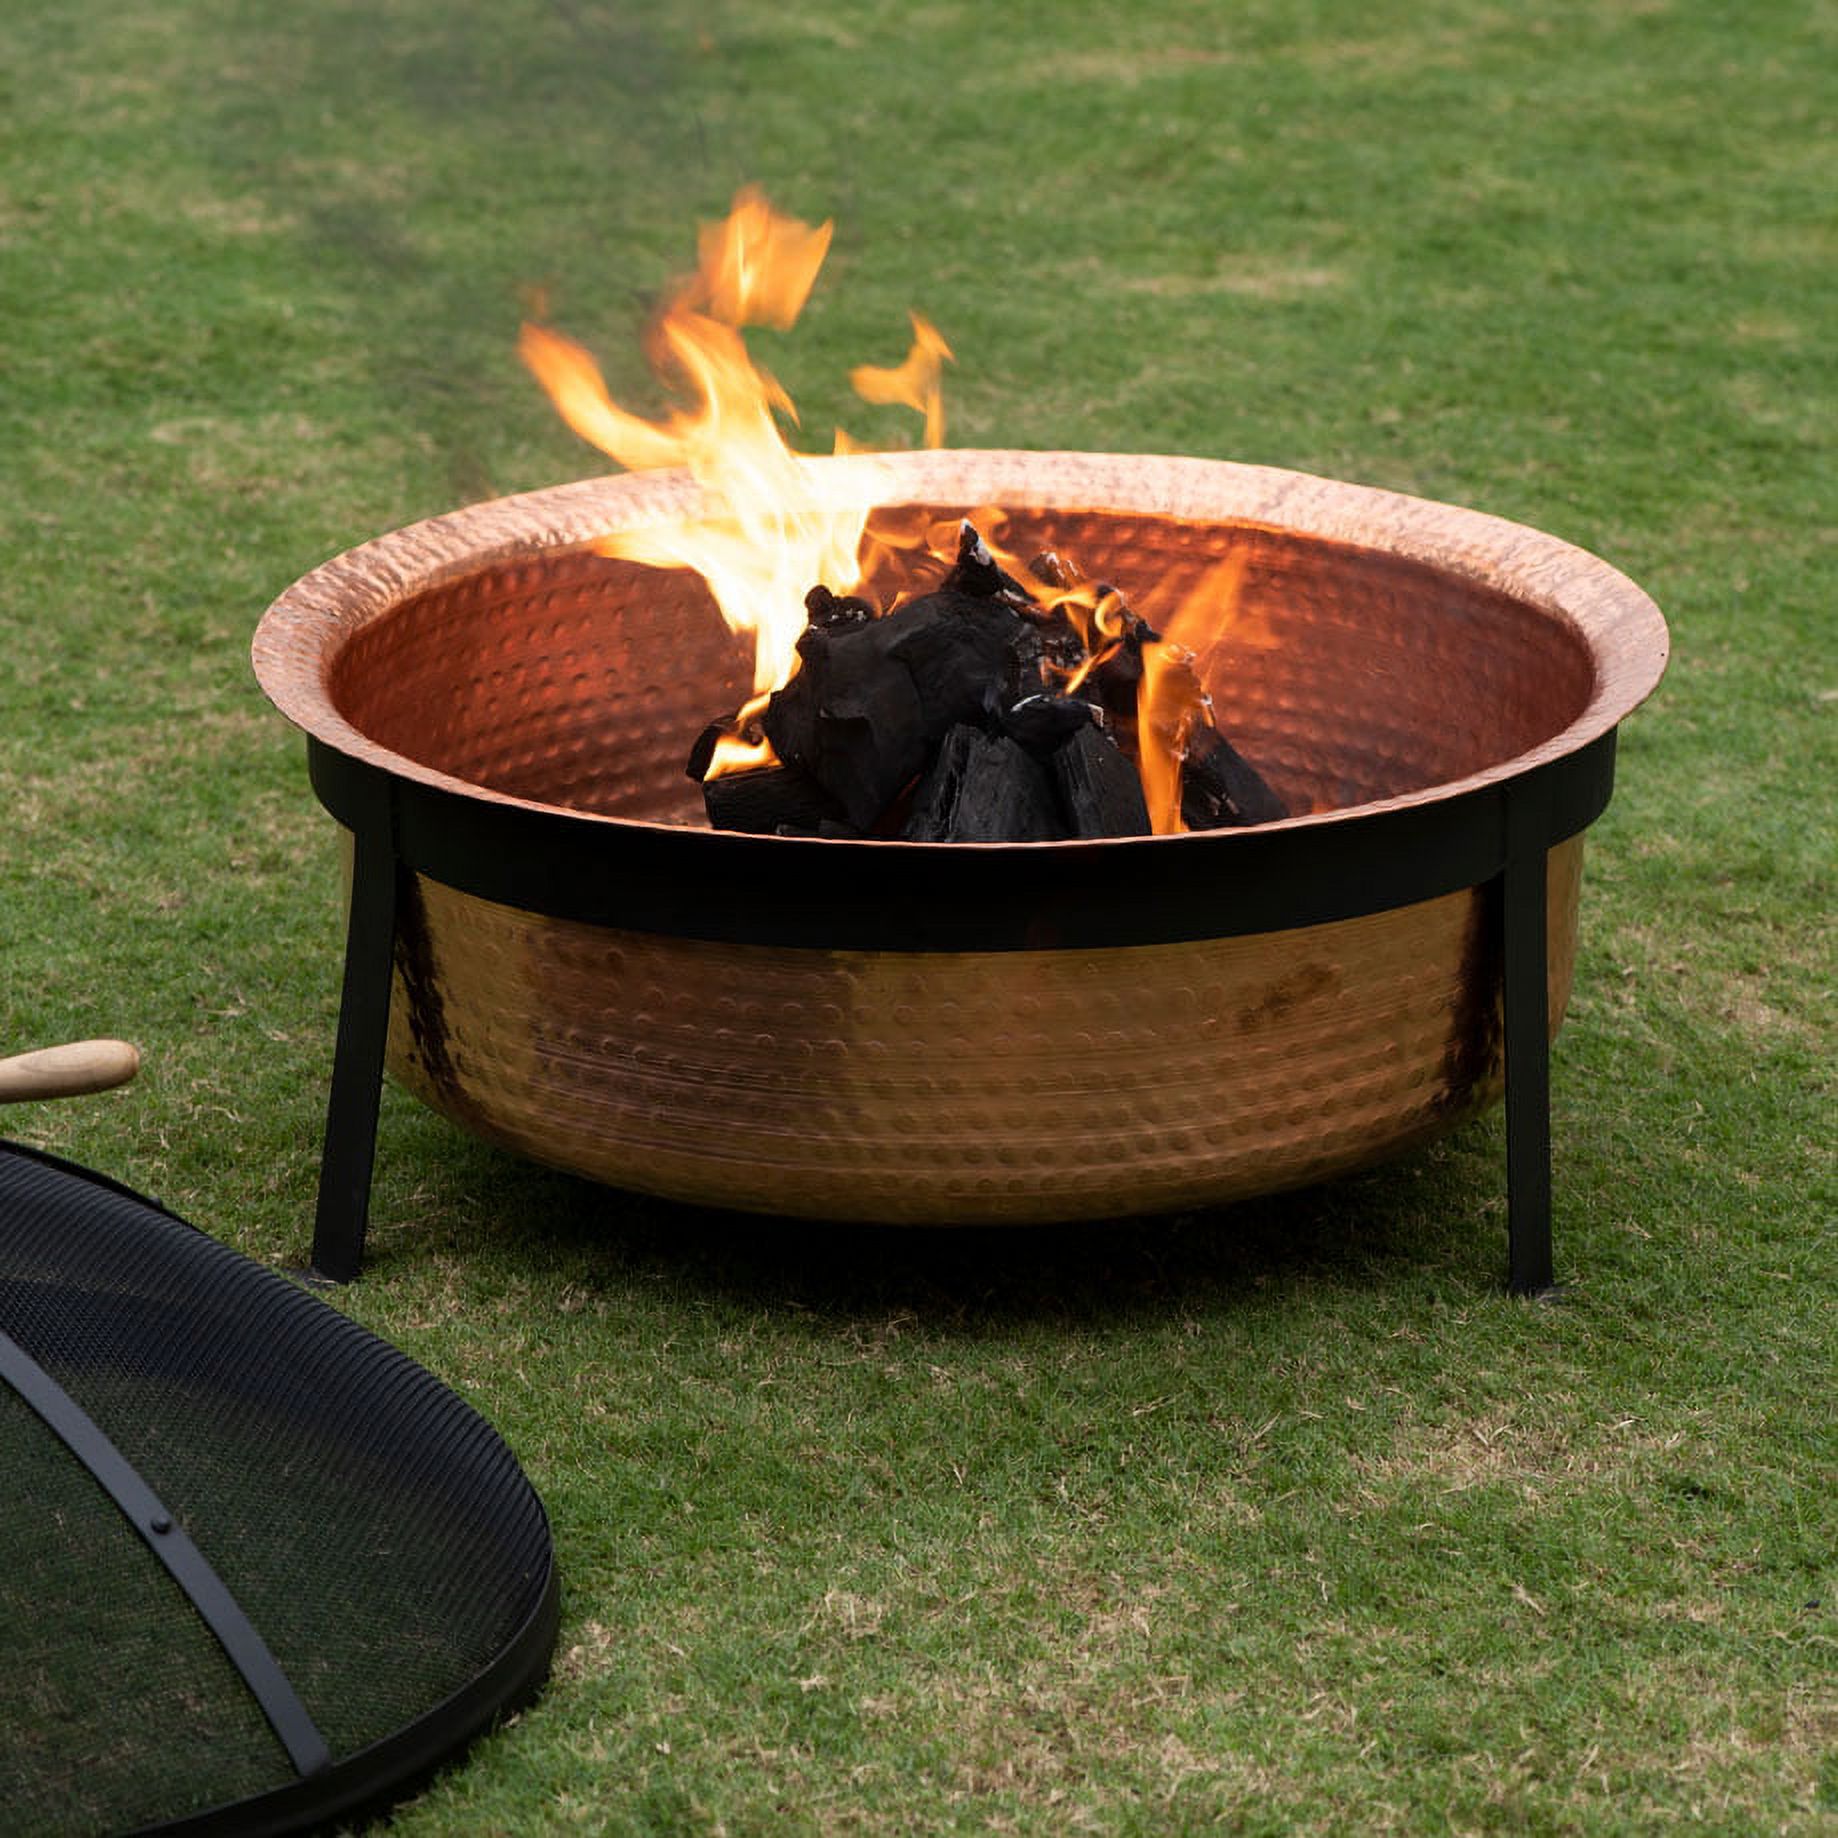 Better Homes & Gardens Wood Burning Copper Fire Pit, 30-inch diameter and 22-inch Height - image 2 of 9